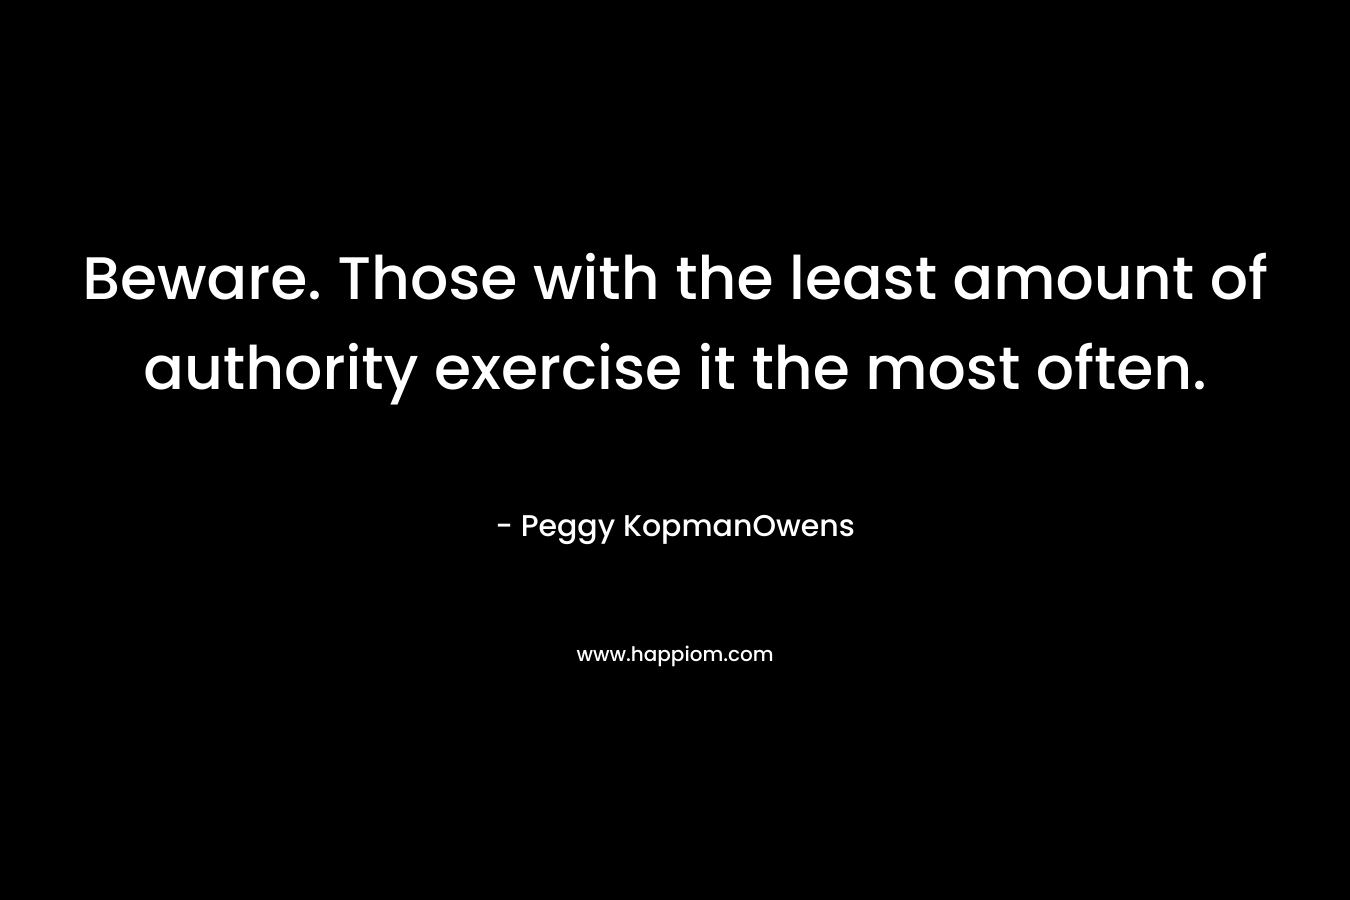 Beware. Those with the least amount of authority exercise it the most often.